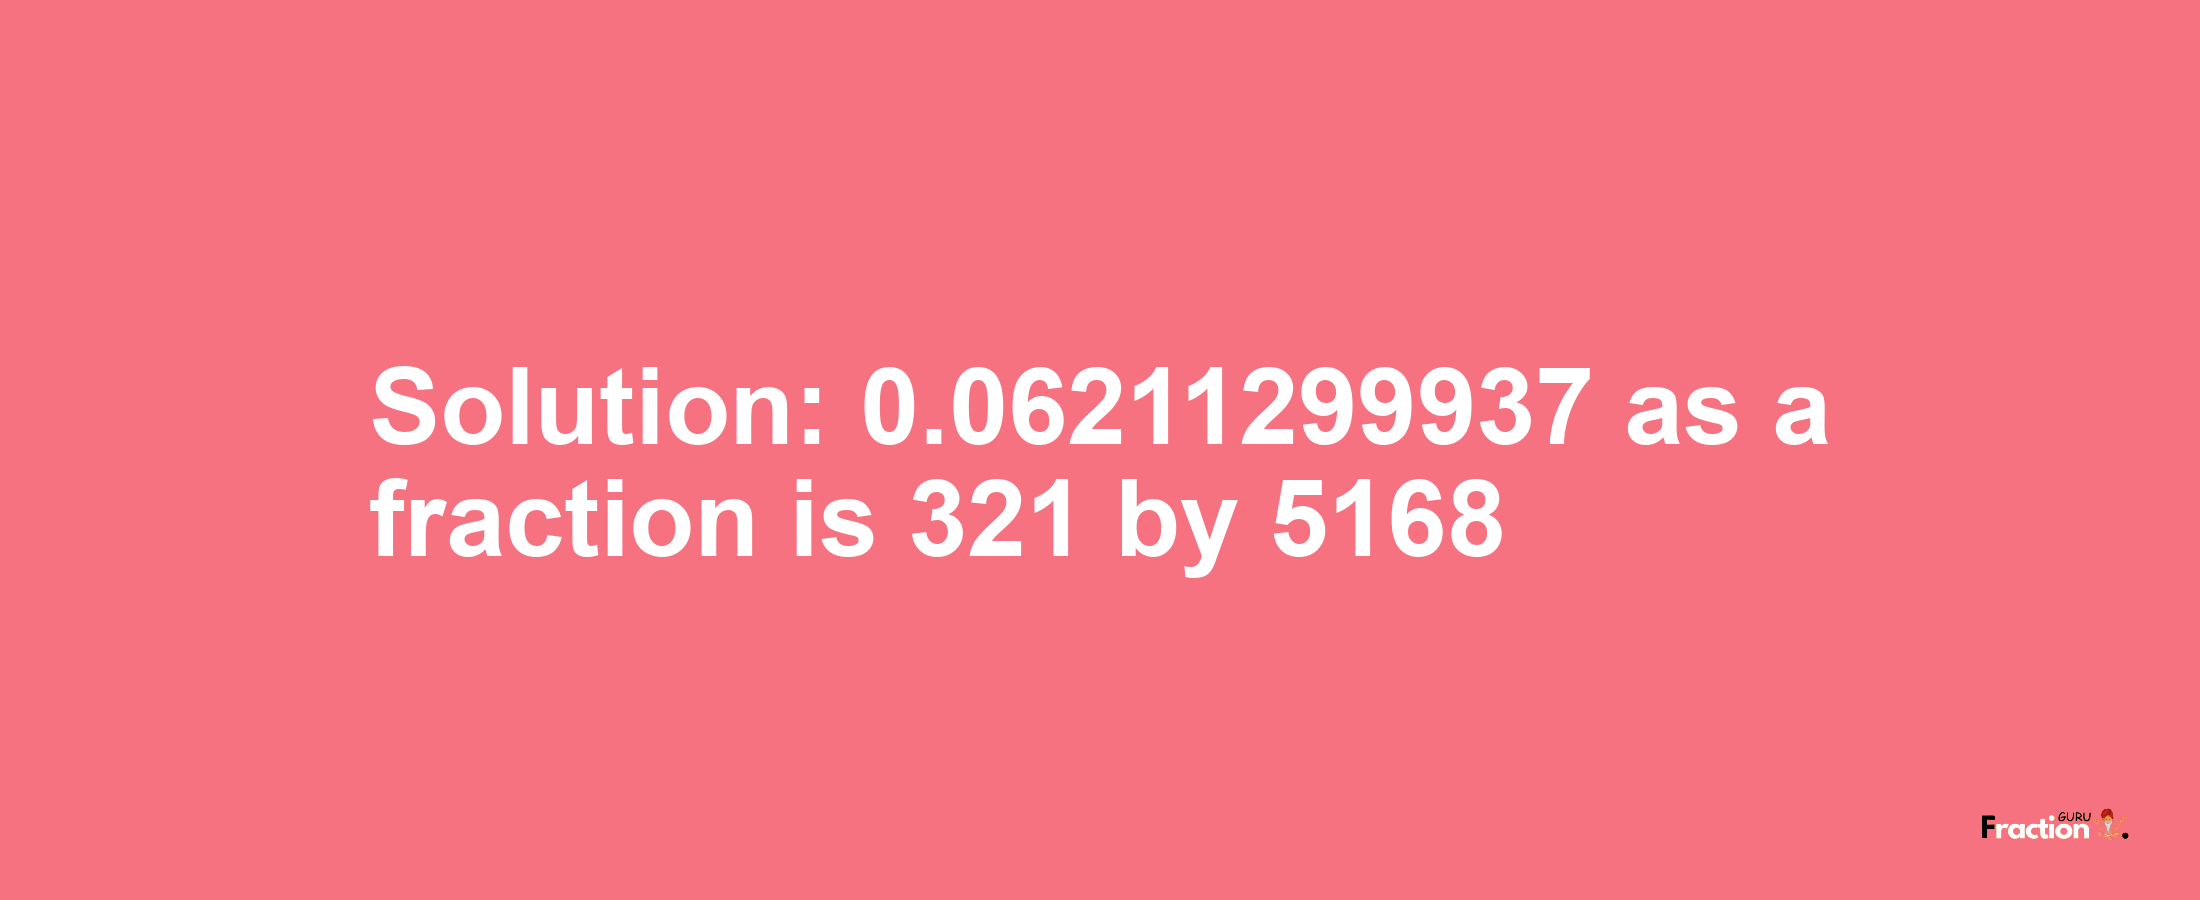 Solution:0.06211299937 as a fraction is 321/5168